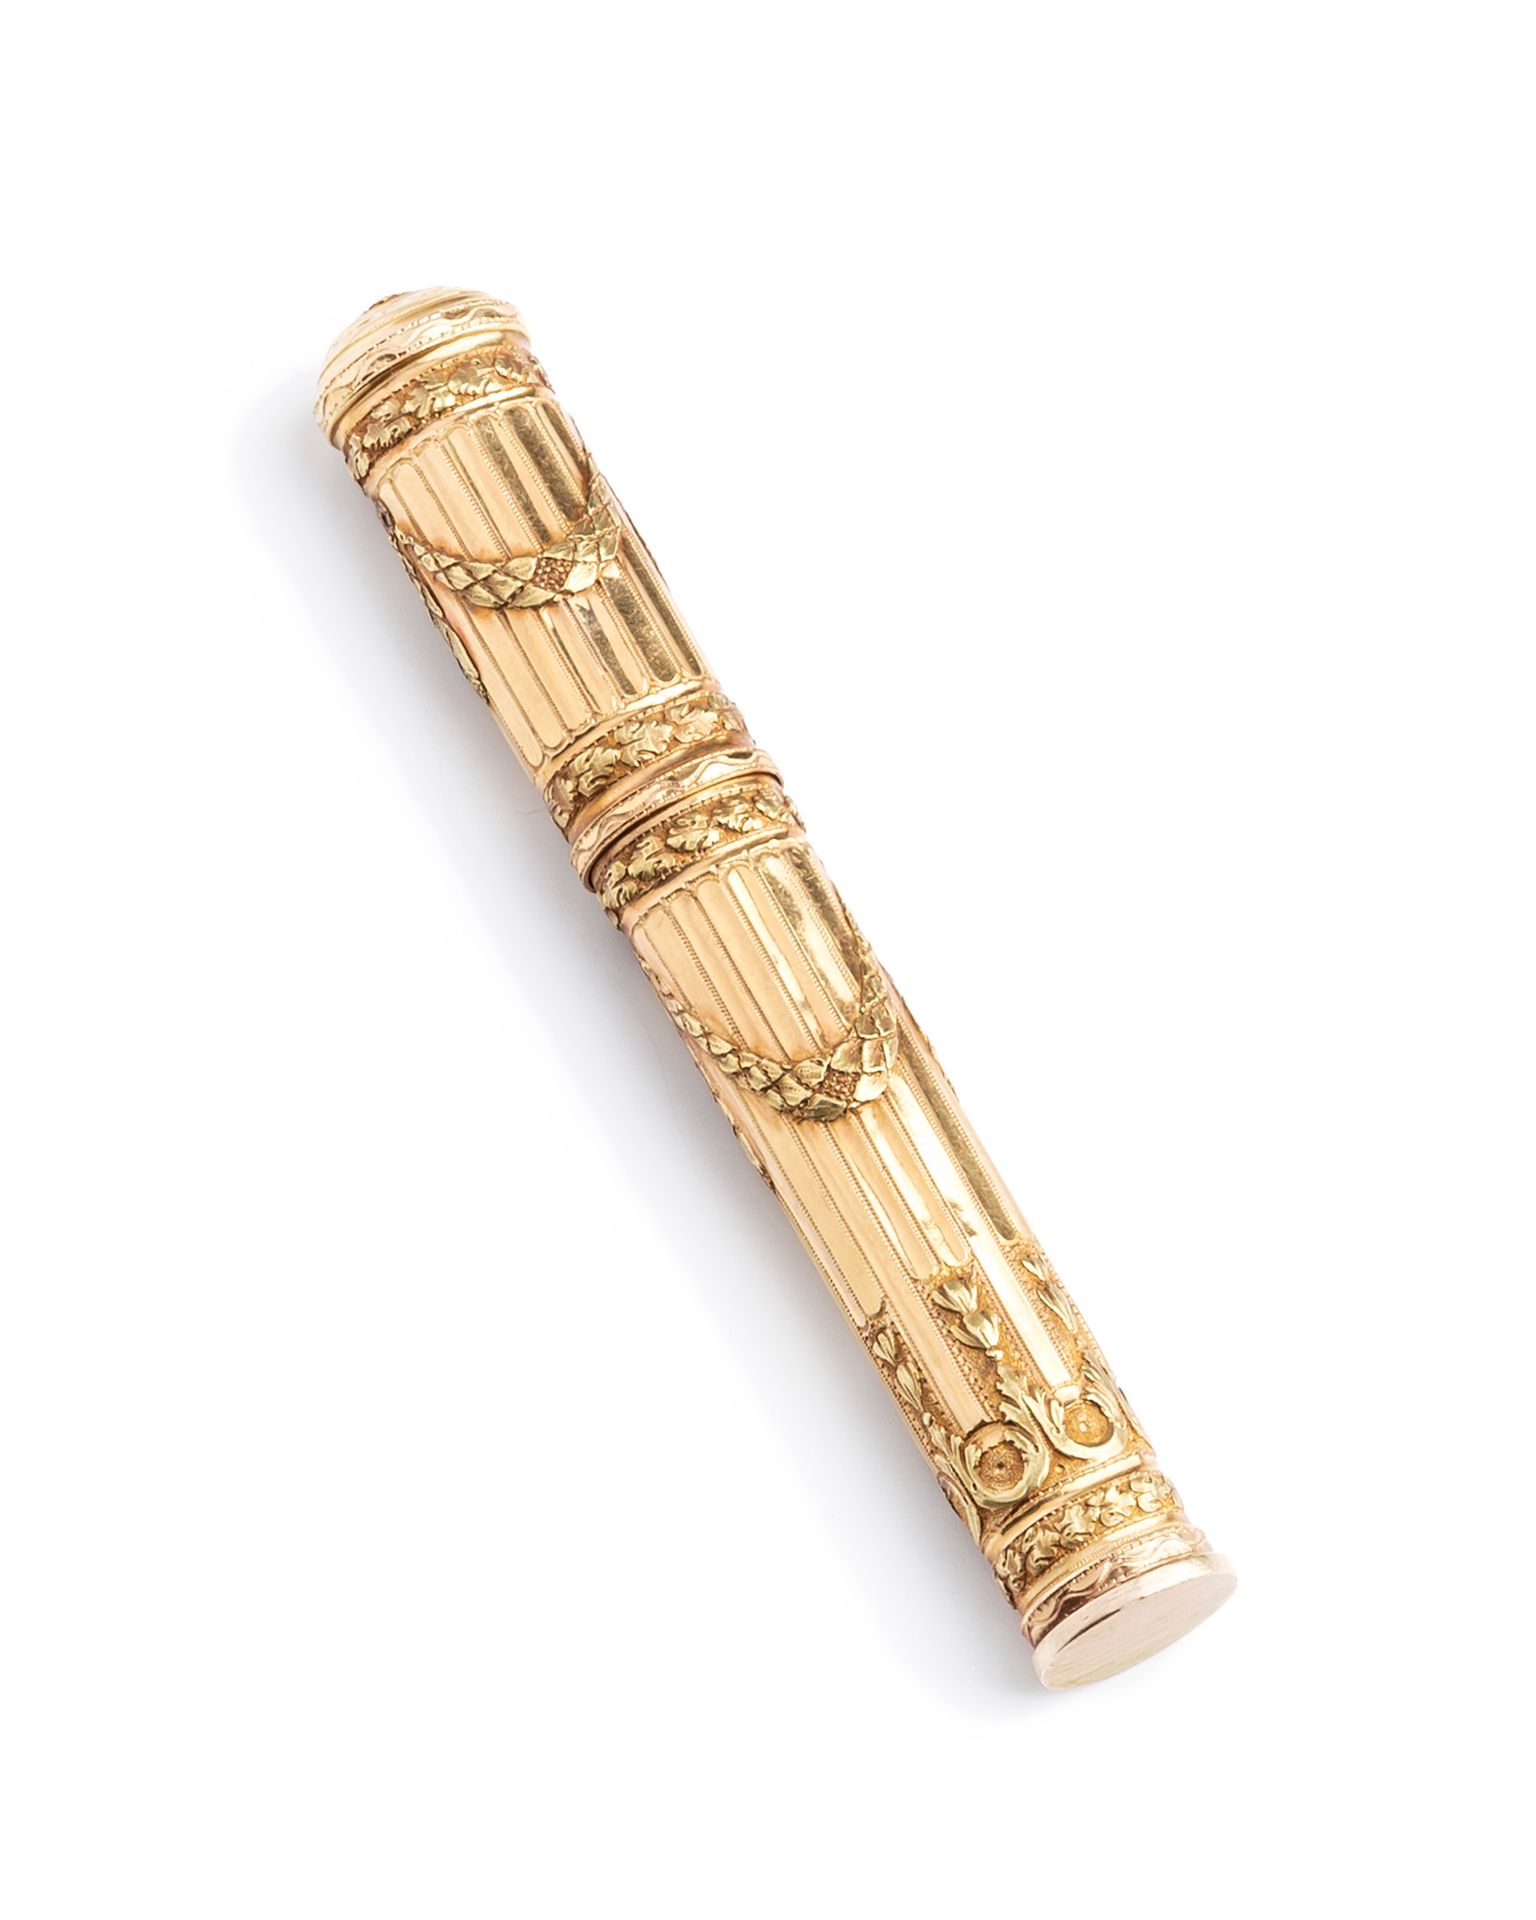 Null Wax case in yellow gold 18K (750 thousandths), fluted and decorated with ga&hellip;